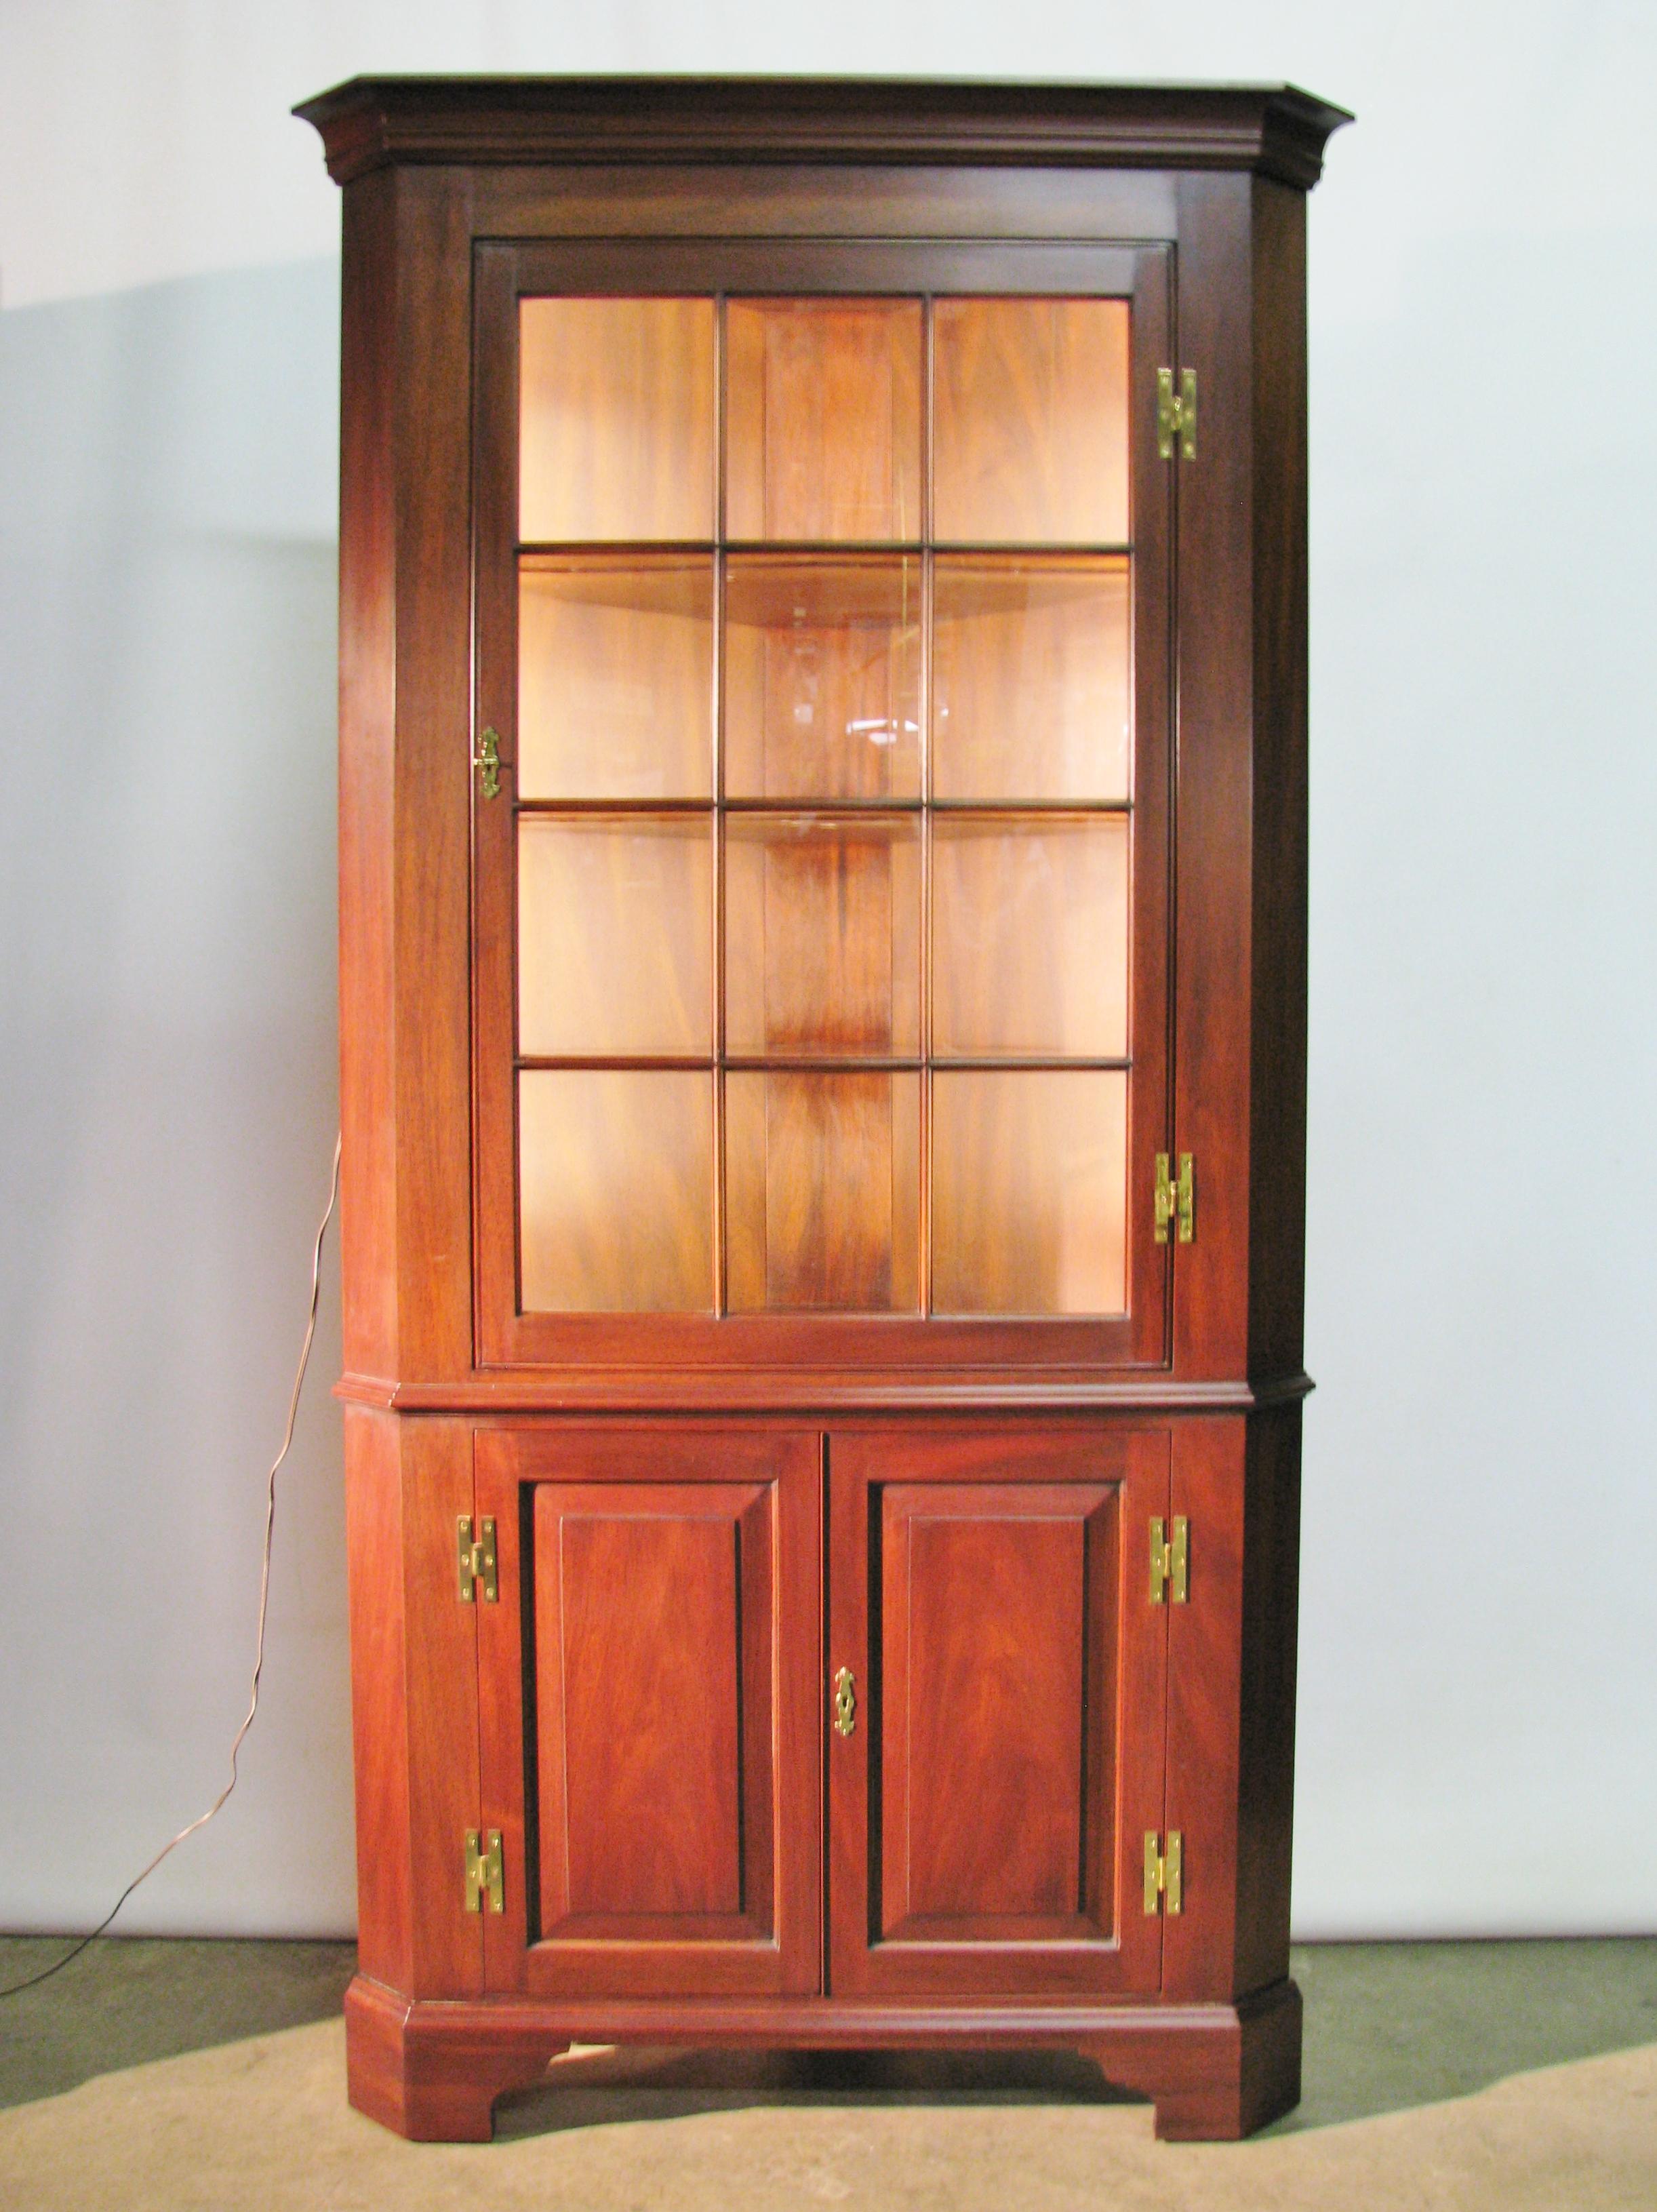 Pair of exceptional, solid mahogany Federal style corner cabinets by Henkel-Harris from their 